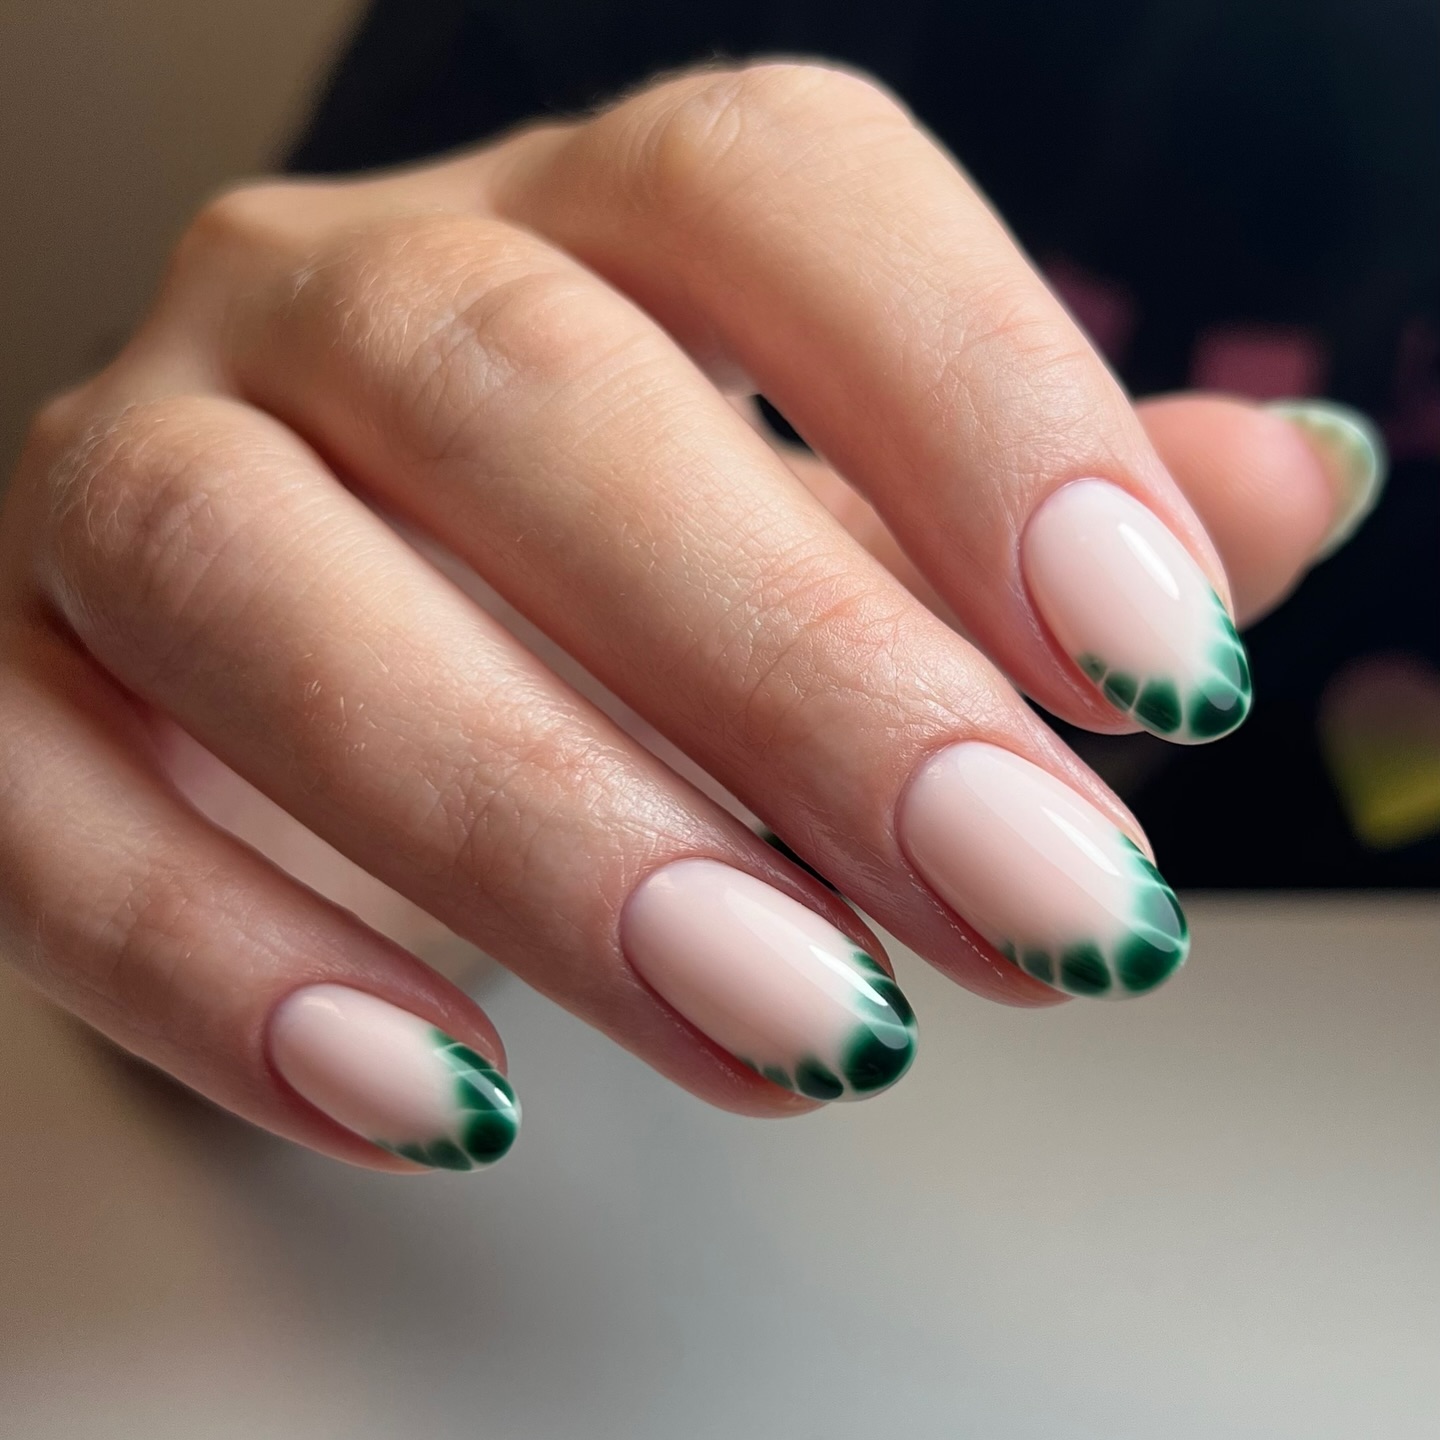 Spring Inspired French Manicure with Green Leaf Tips